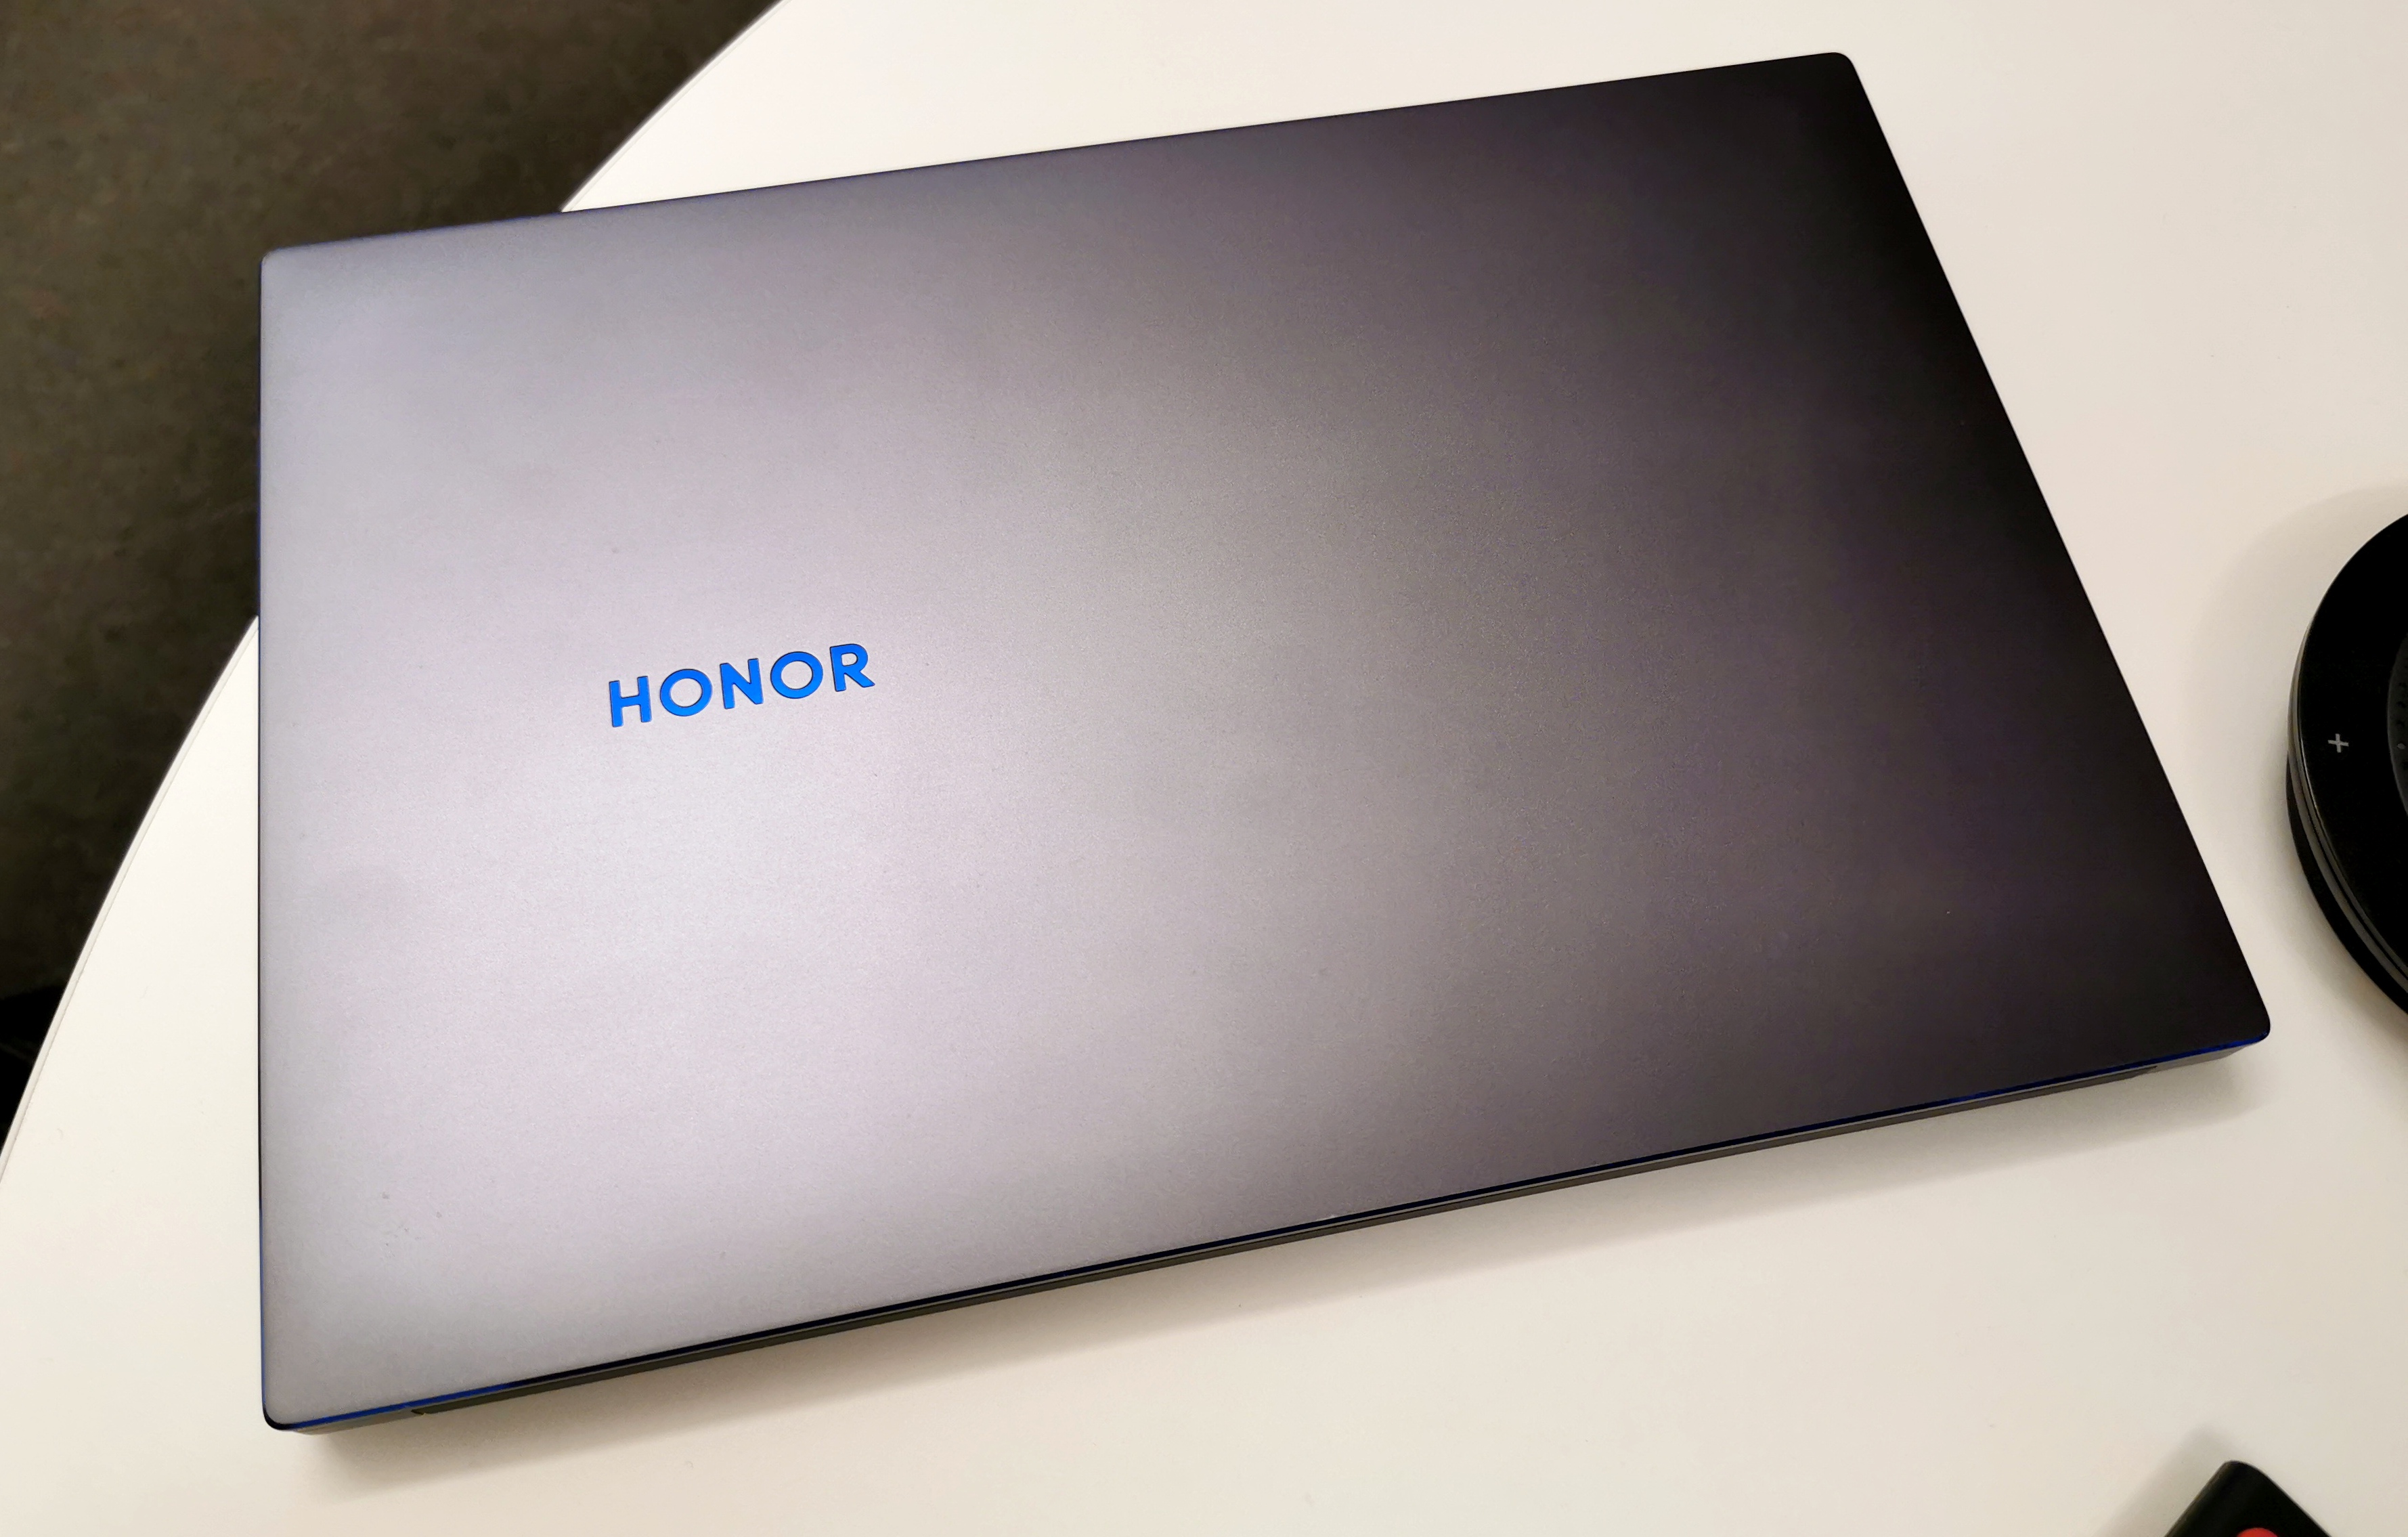 Honor refreshes its MagicBook 14 and 15 with Intel Tiger Lake processors -  Neowin